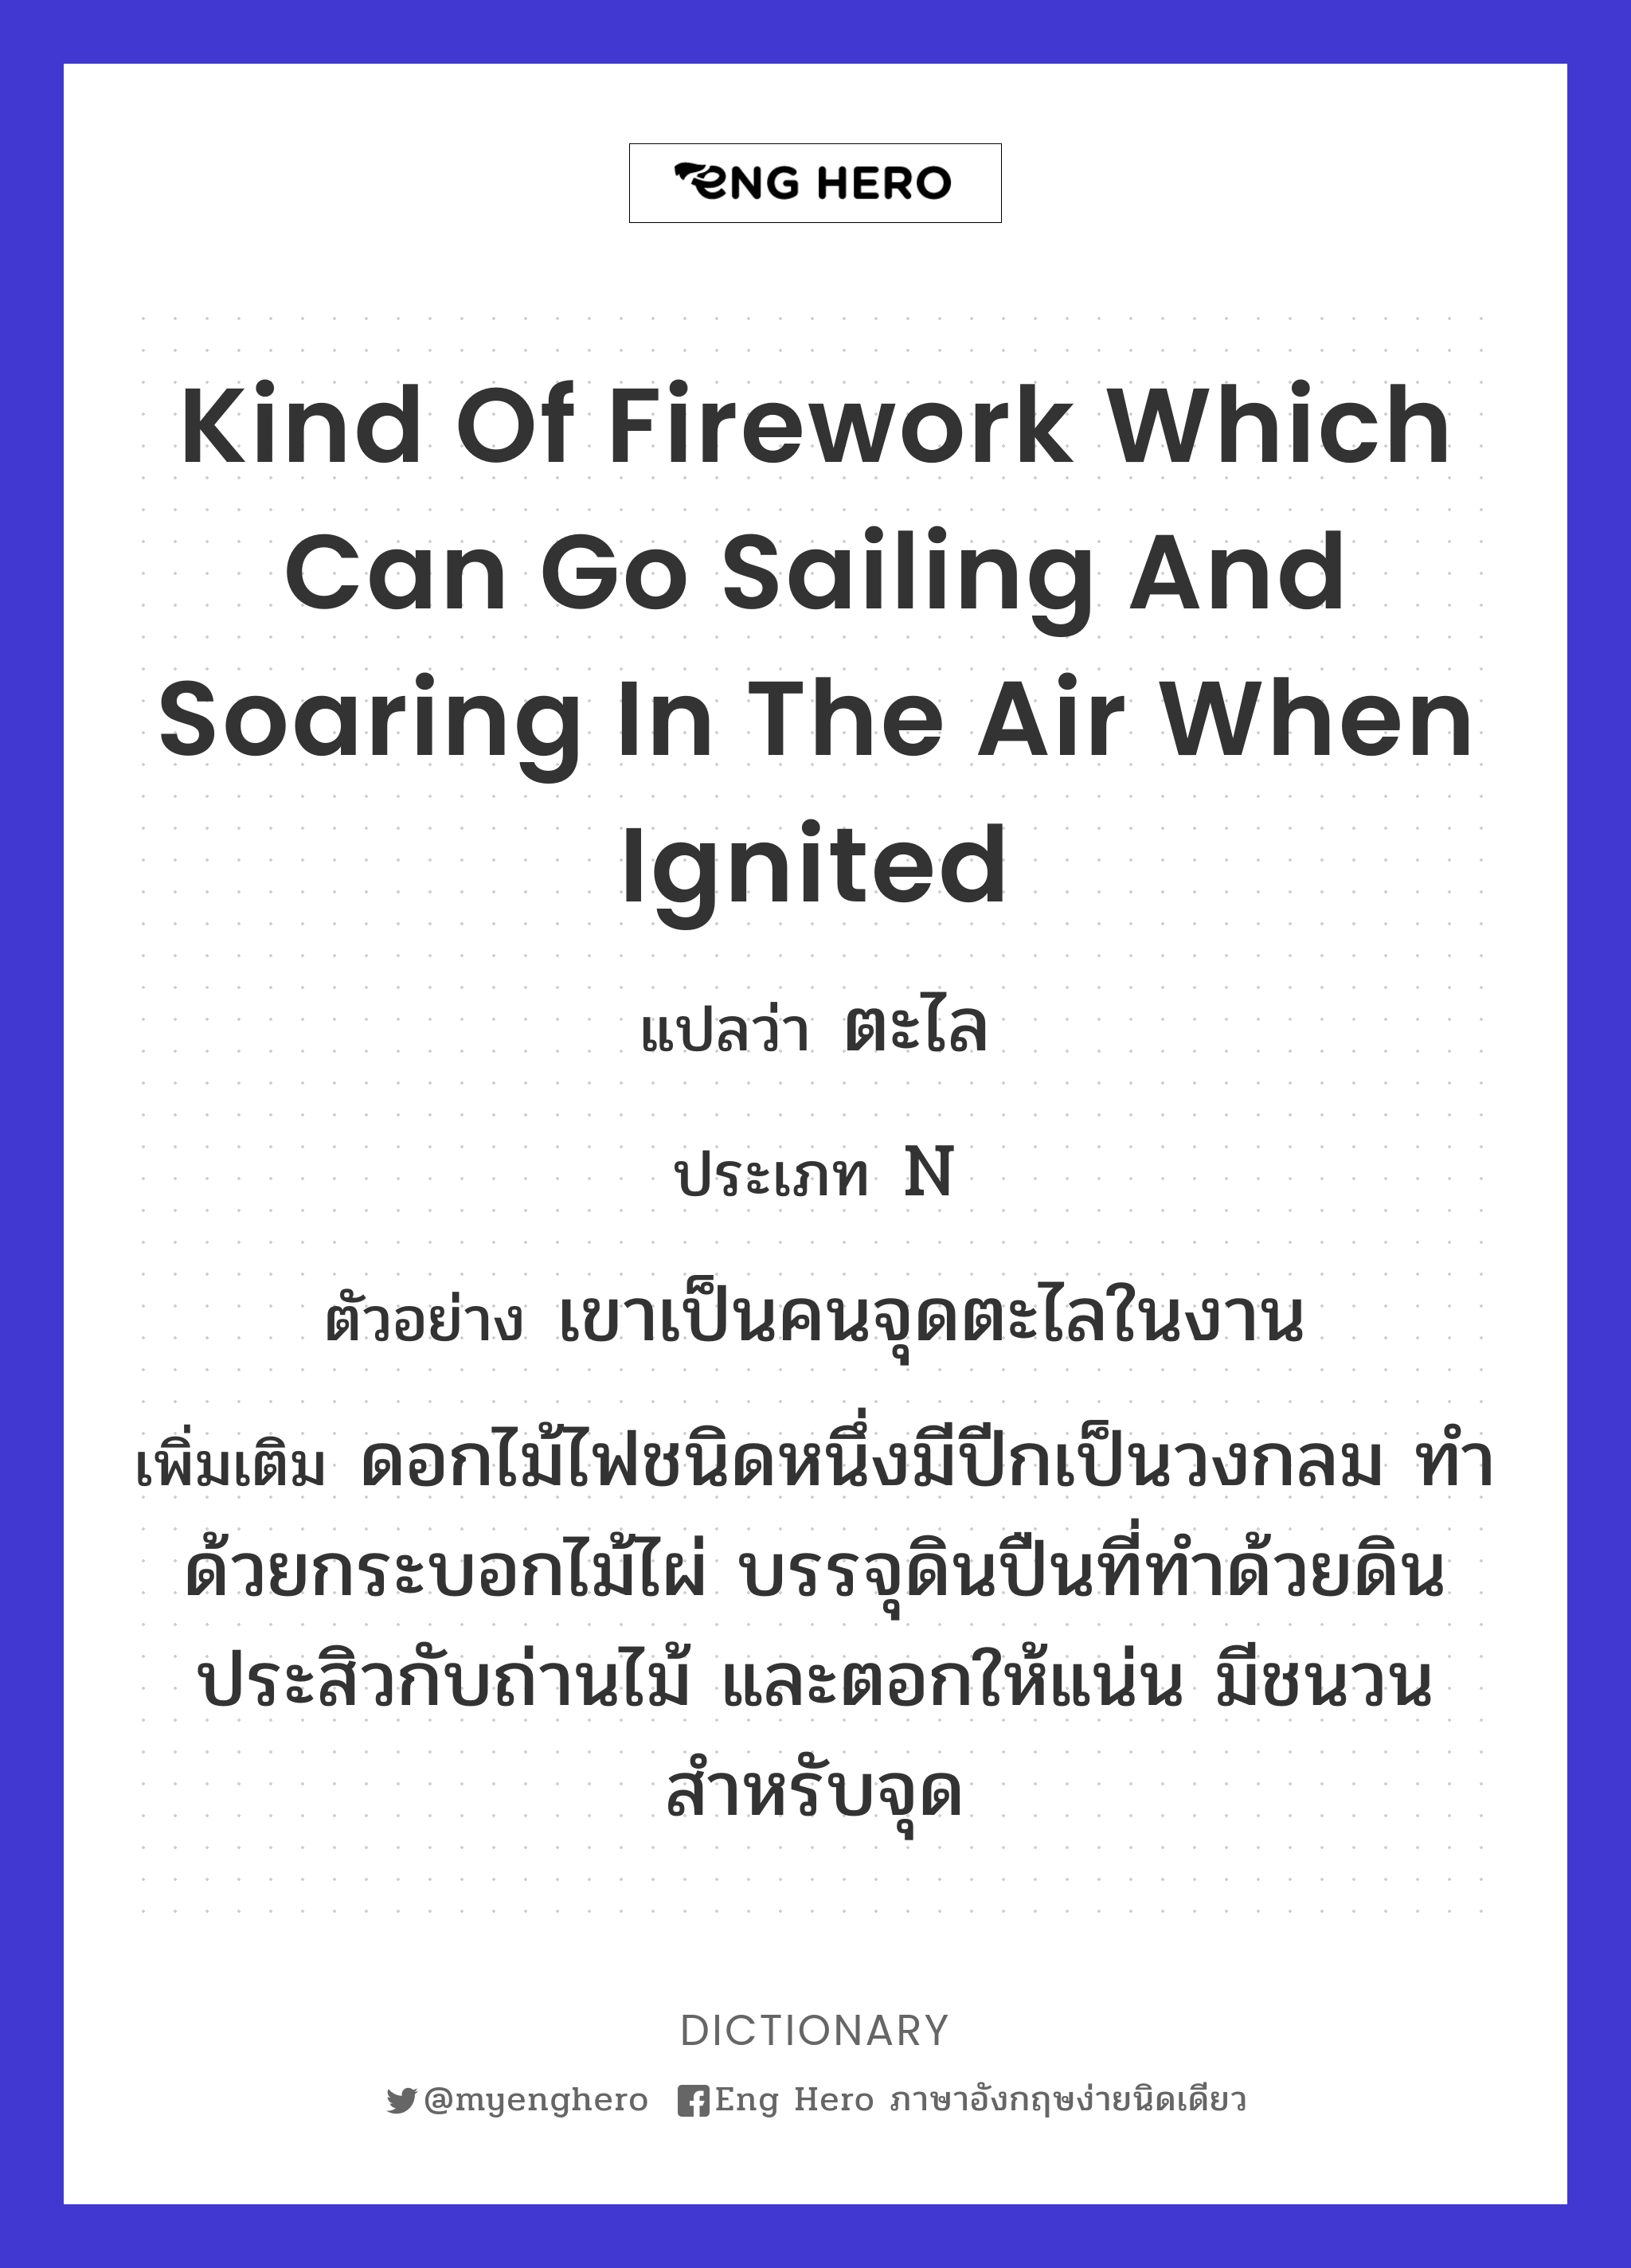 kind of firework which can go sailing and soaring in the air when ignited